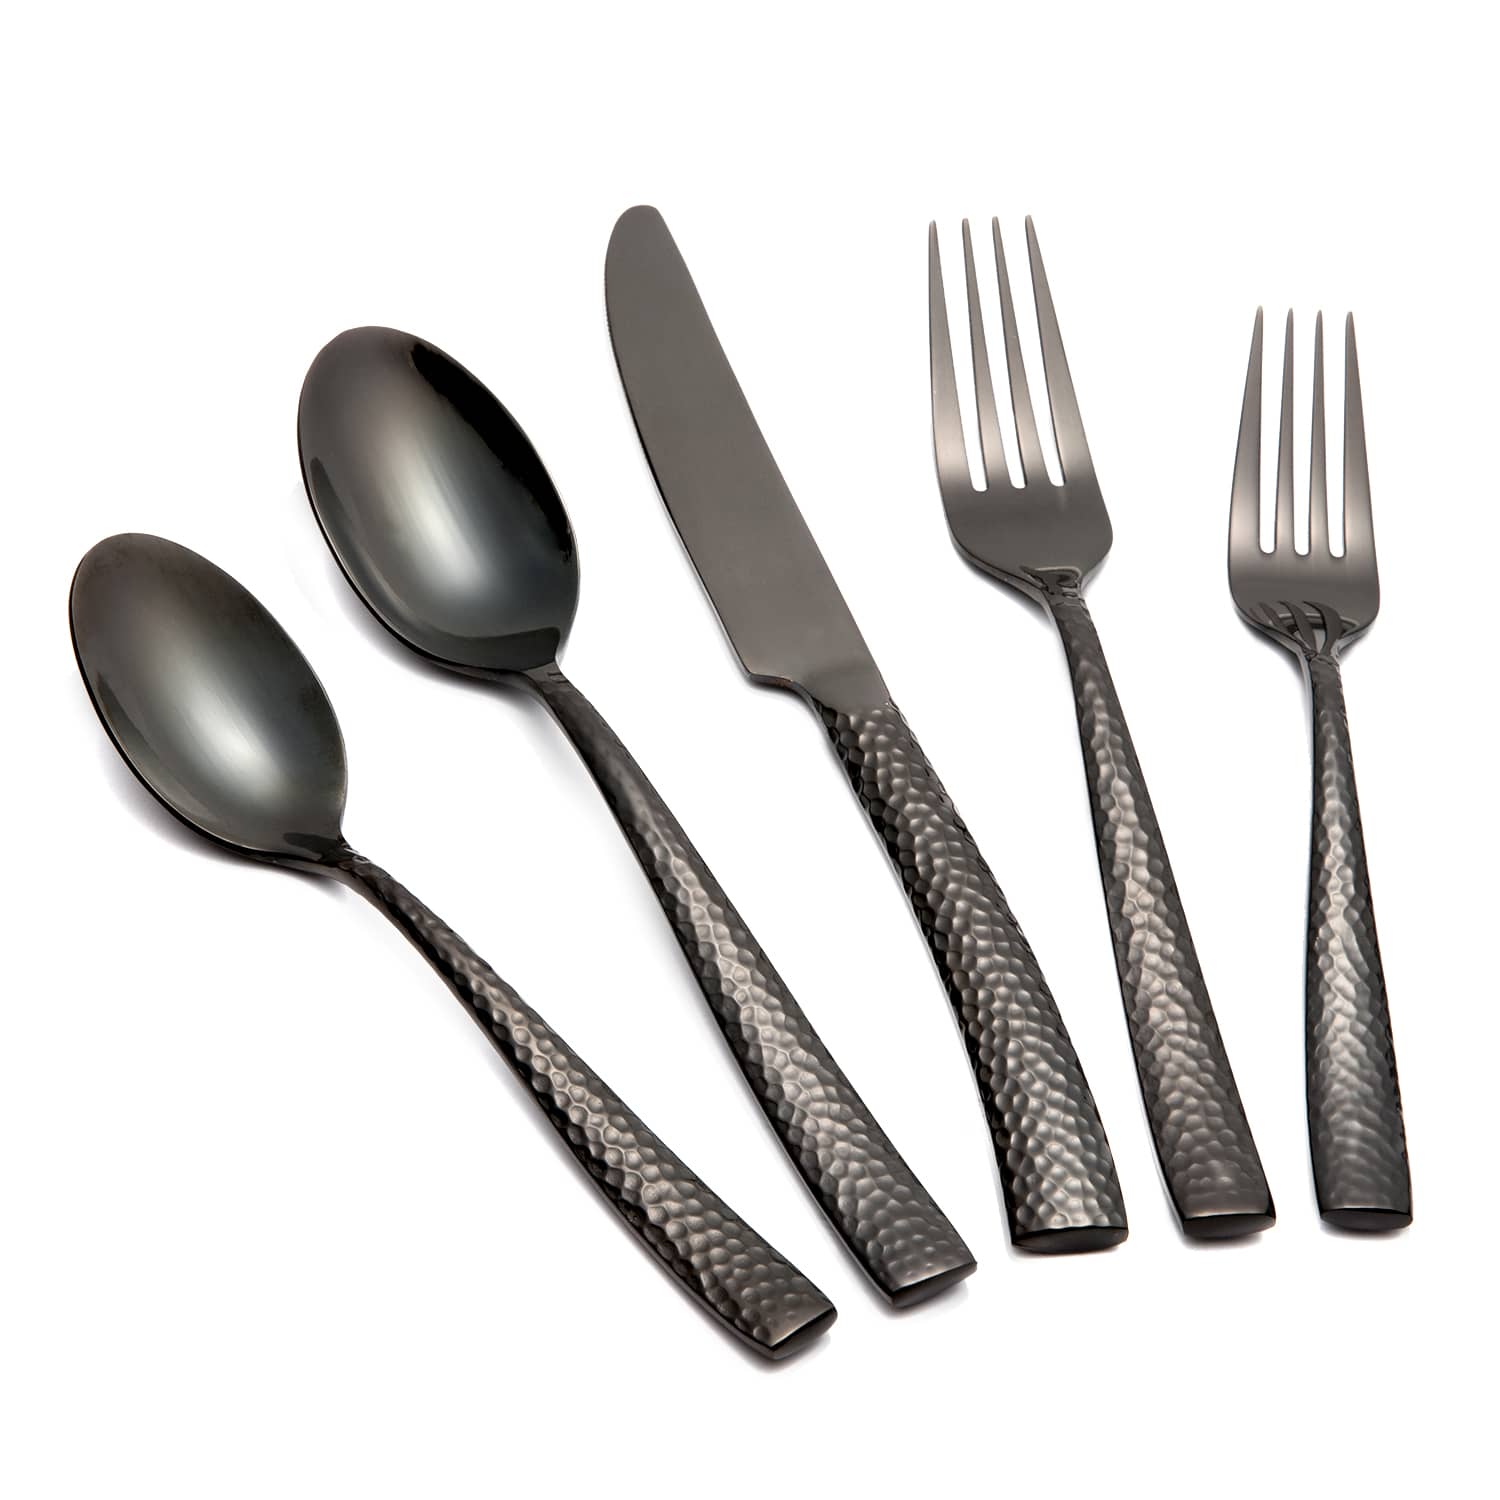 Hot sale Stainless Flatware - Black Hammered Stainless Steel Flatware Set for Wedding Party Home – Liou Featured Image